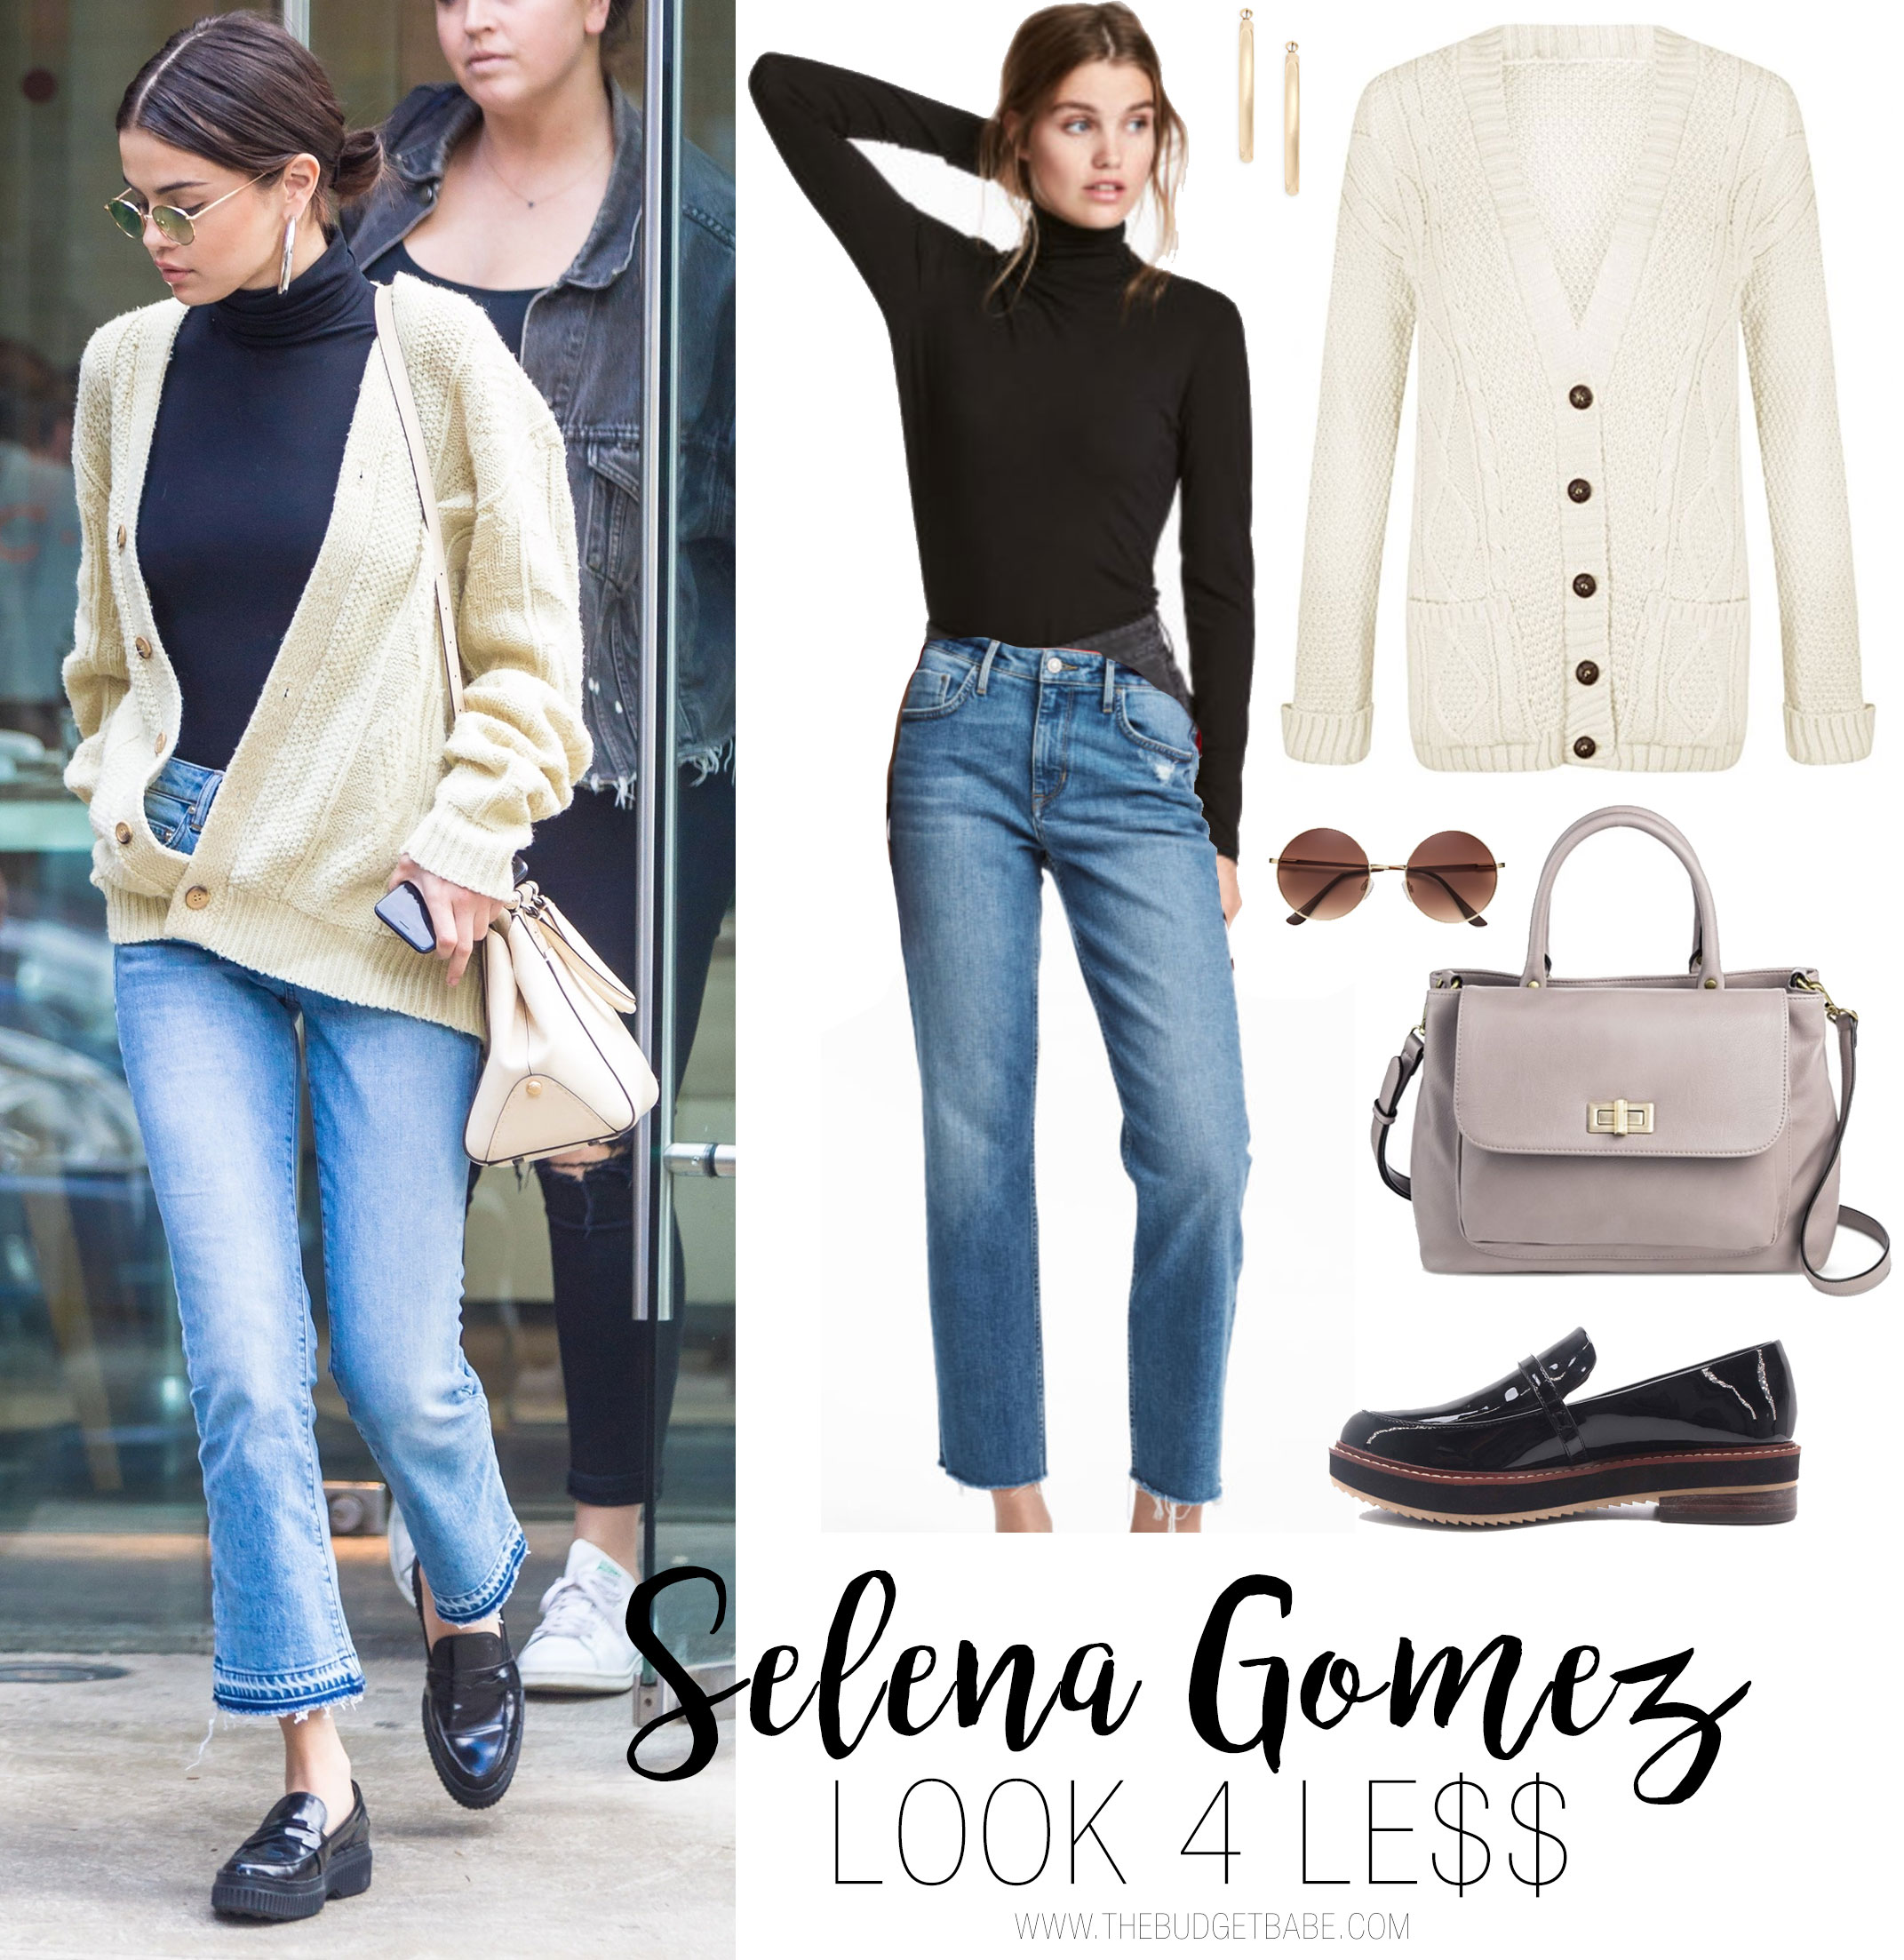 Selena Gomez looks cozy and cool in a chunky sweater, turtleneck sweater, crop jeans and loafer flats.